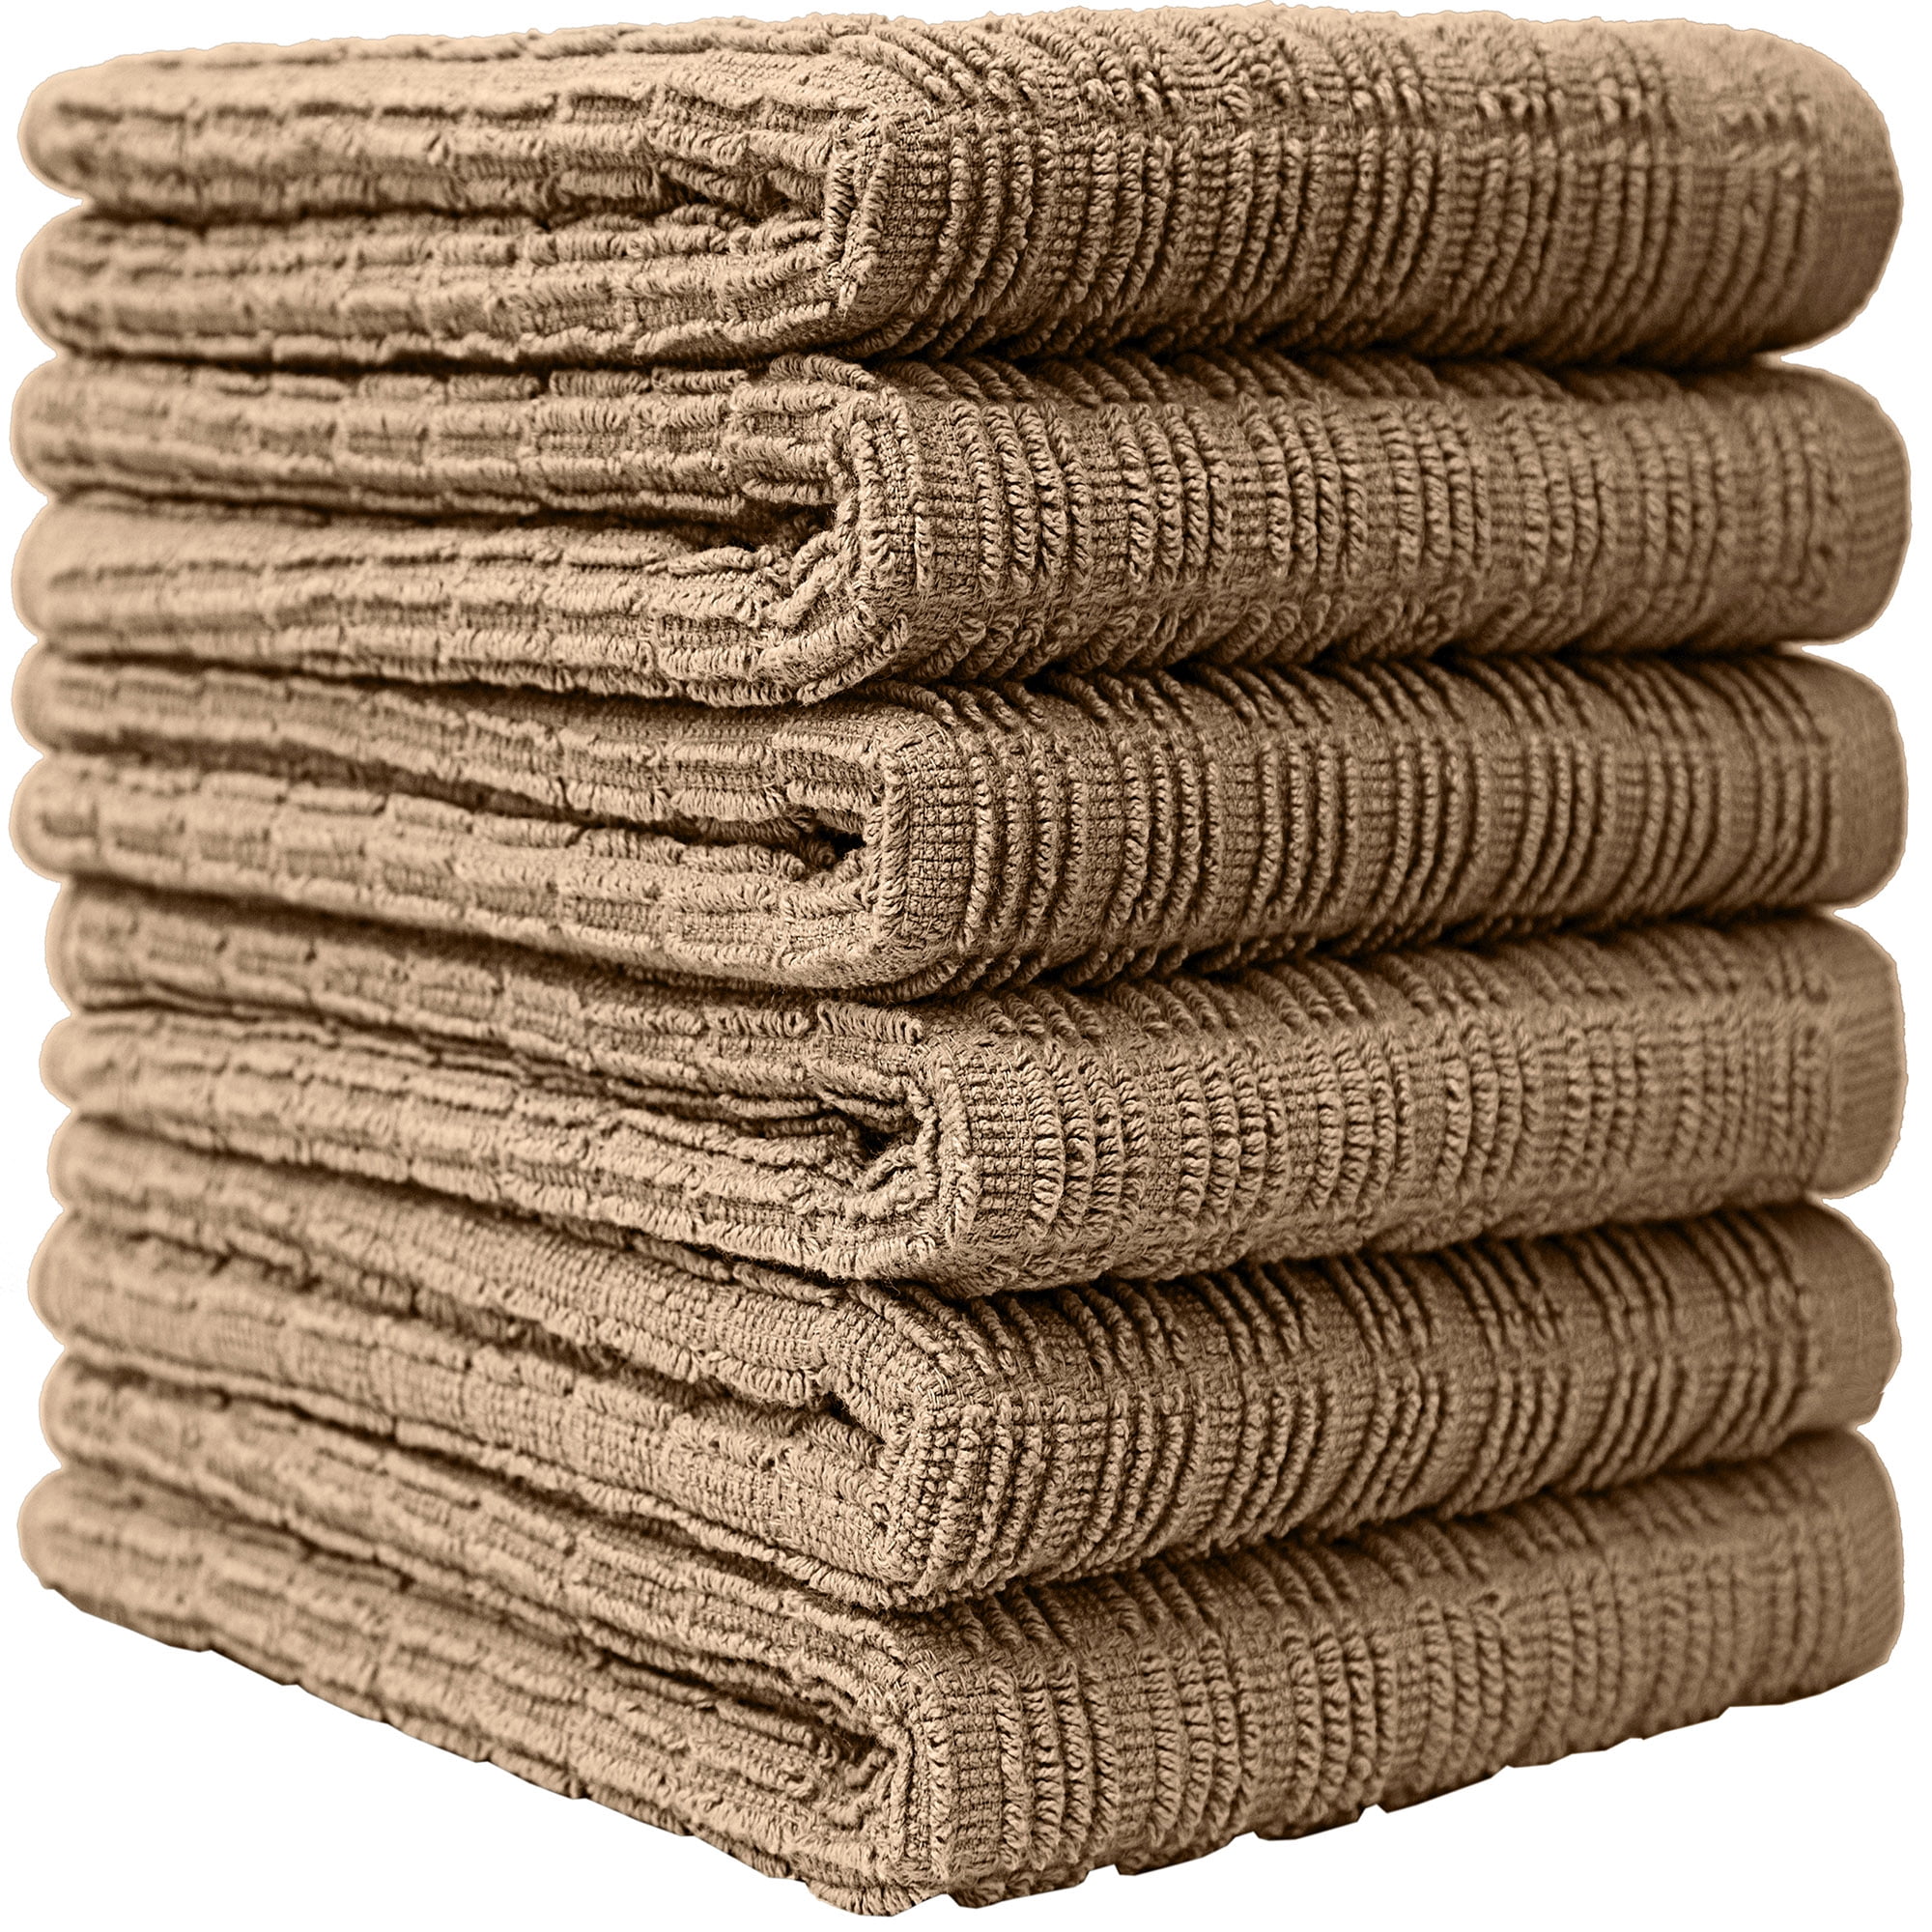 Premium Kitchen Towels (16x 28, 6 Pack) Large Cotton Kitchen Hand Towels  Chef Weave Design 380 GSM Highly Absorbent Tea Towels Set With Hanging Loop  Grey 